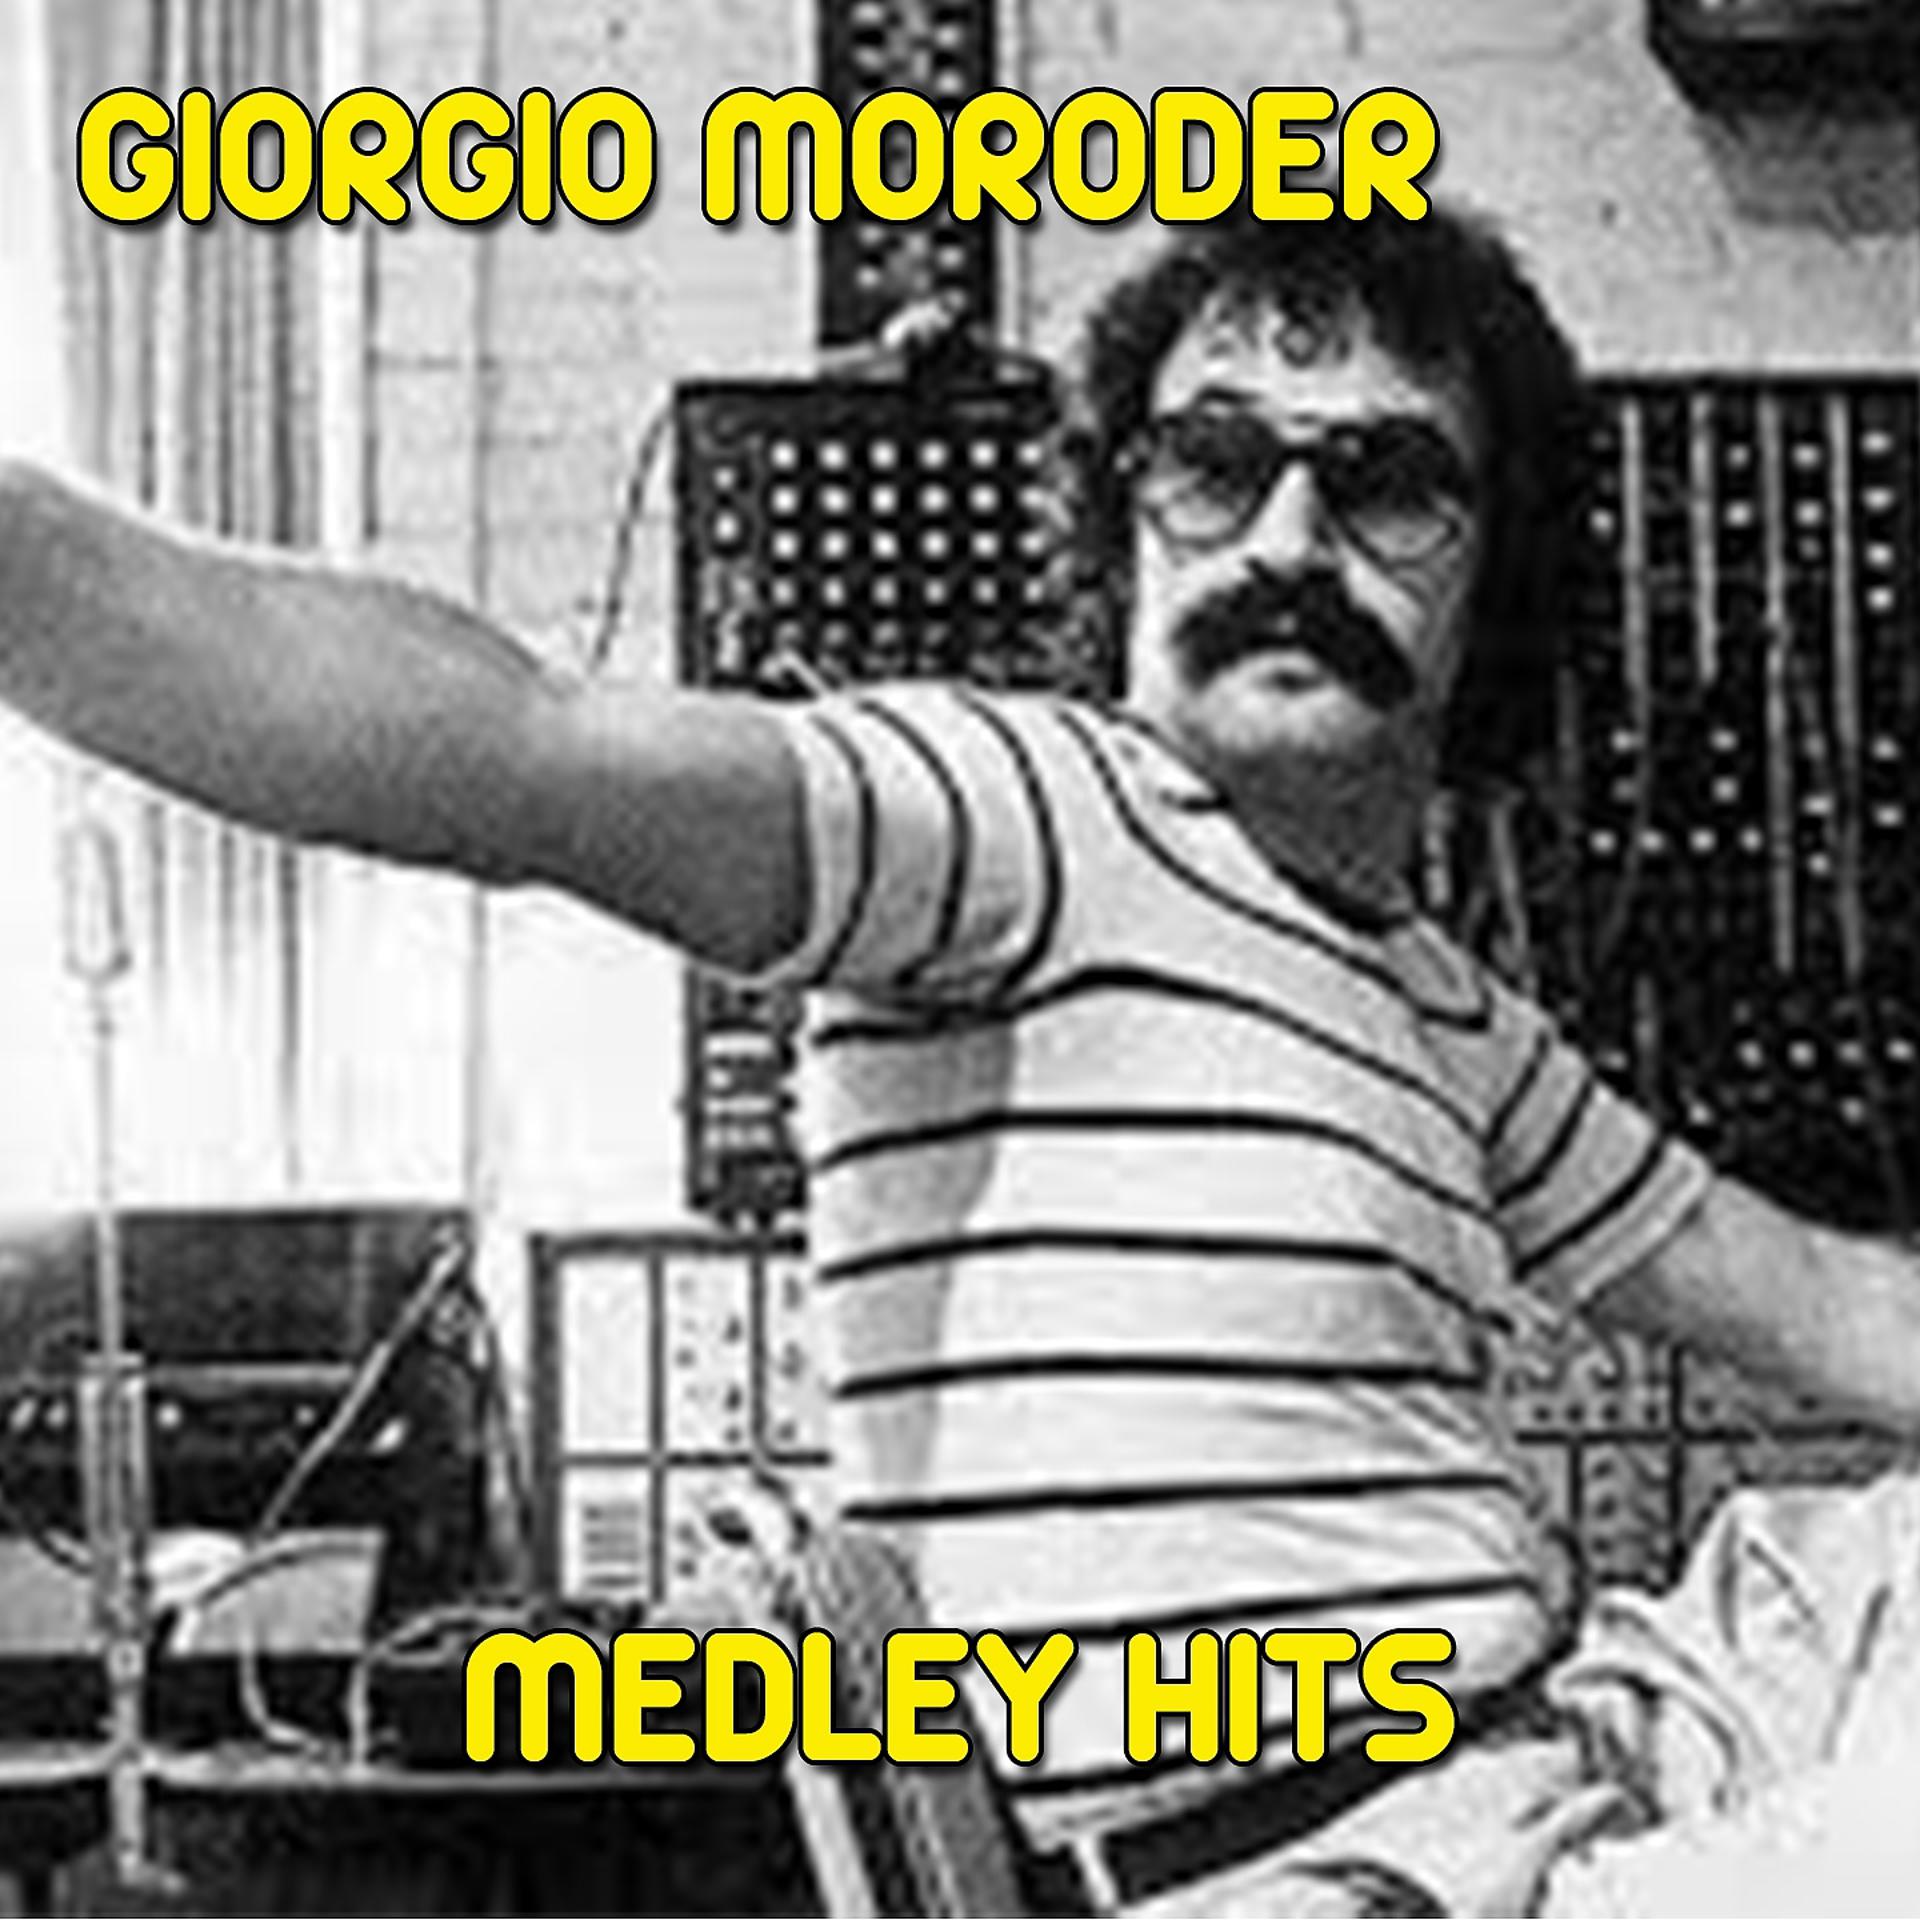 Постер альбома Giorgio Moroder Medley: From Here to Eternity / Utopia-Me Giorgio / Baby Blue / First Hand Experience in Second Hand Love / I'm Left, You're Right, She's Gone / I Wanna Rock You / Knights in White Satin / Trouble Maker / Get On the Funk Train / Beat the C